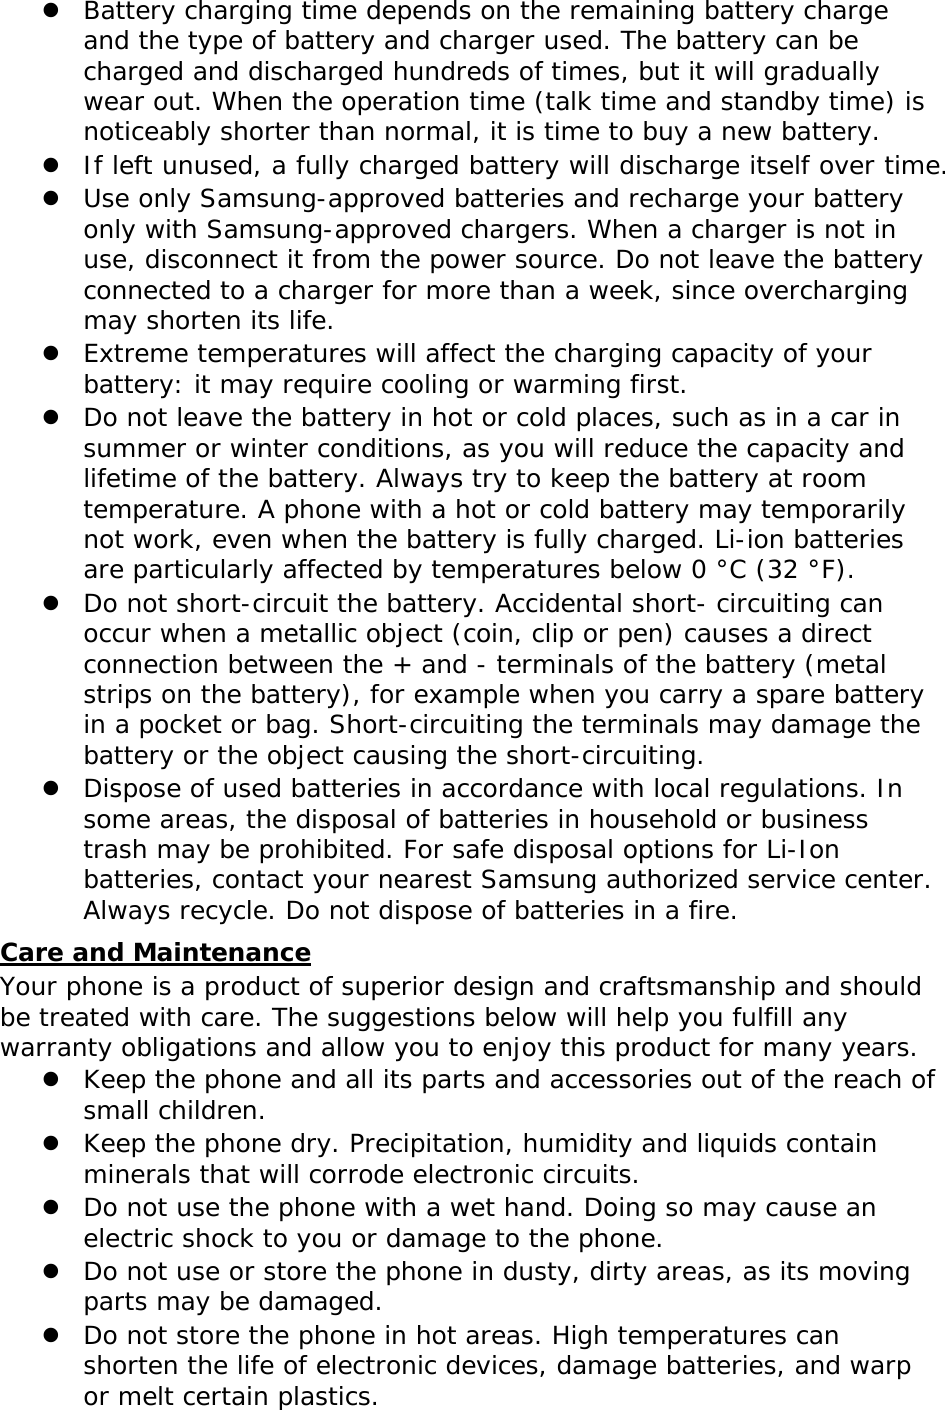 z Battery charging time depends on the remaining battery charge and the type of battery and charger used. The battery can be charged and discharged hundreds of times, but it will gradually wear out. When the operation time (talk time and standby time) is noticeably shorter than normal, it is time to buy a new battery. z If left unused, a fully charged battery will discharge itself over time. z Use only Samsung-approved batteries and recharge your battery only with Samsung-approved chargers. When a charger is not in use, disconnect it from the power source. Do not leave the battery connected to a charger for more than a week, since overcharging may shorten its life. z Extreme temperatures will affect the charging capacity of your battery: it may require cooling or warming first. z Do not leave the battery in hot or cold places, such as in a car in summer or winter conditions, as you will reduce the capacity and lifetime of the battery. Always try to keep the battery at room temperature. A phone with a hot or cold battery may temporarily not work, even when the battery is fully charged. Li-ion batteries are particularly affected by temperatures below 0 °C (32 °F). z Do not short-circuit the battery. Accidental short- circuiting can occur when a metallic object (coin, clip or pen) causes a direct connection between the + and - terminals of the battery (metal strips on the battery), for example when you carry a spare battery in a pocket or bag. Short-circuiting the terminals may damage the battery or the object causing the short-circuiting. z Dispose of used batteries in accordance with local regulations. In some areas, the disposal of batteries in household or business trash may be prohibited. For safe disposal options for Li-Ion batteries, contact your nearest Samsung authorized service center. Always recycle. Do not dispose of batteries in a fire. Care and Maintenance Your phone is a product of superior design and craftsmanship and should be treated with care. The suggestions below will help you fulfill any warranty obligations and allow you to enjoy this product for many years. z Keep the phone and all its parts and accessories out of the reach of small children. z Keep the phone dry. Precipitation, humidity and liquids contain minerals that will corrode electronic circuits. z Do not use the phone with a wet hand. Doing so may cause an electric shock to you or damage to the phone. z Do not use or store the phone in dusty, dirty areas, as its moving parts may be damaged. z Do not store the phone in hot areas. High temperatures can shorten the life of electronic devices, damage batteries, and warp or melt certain plastics. 